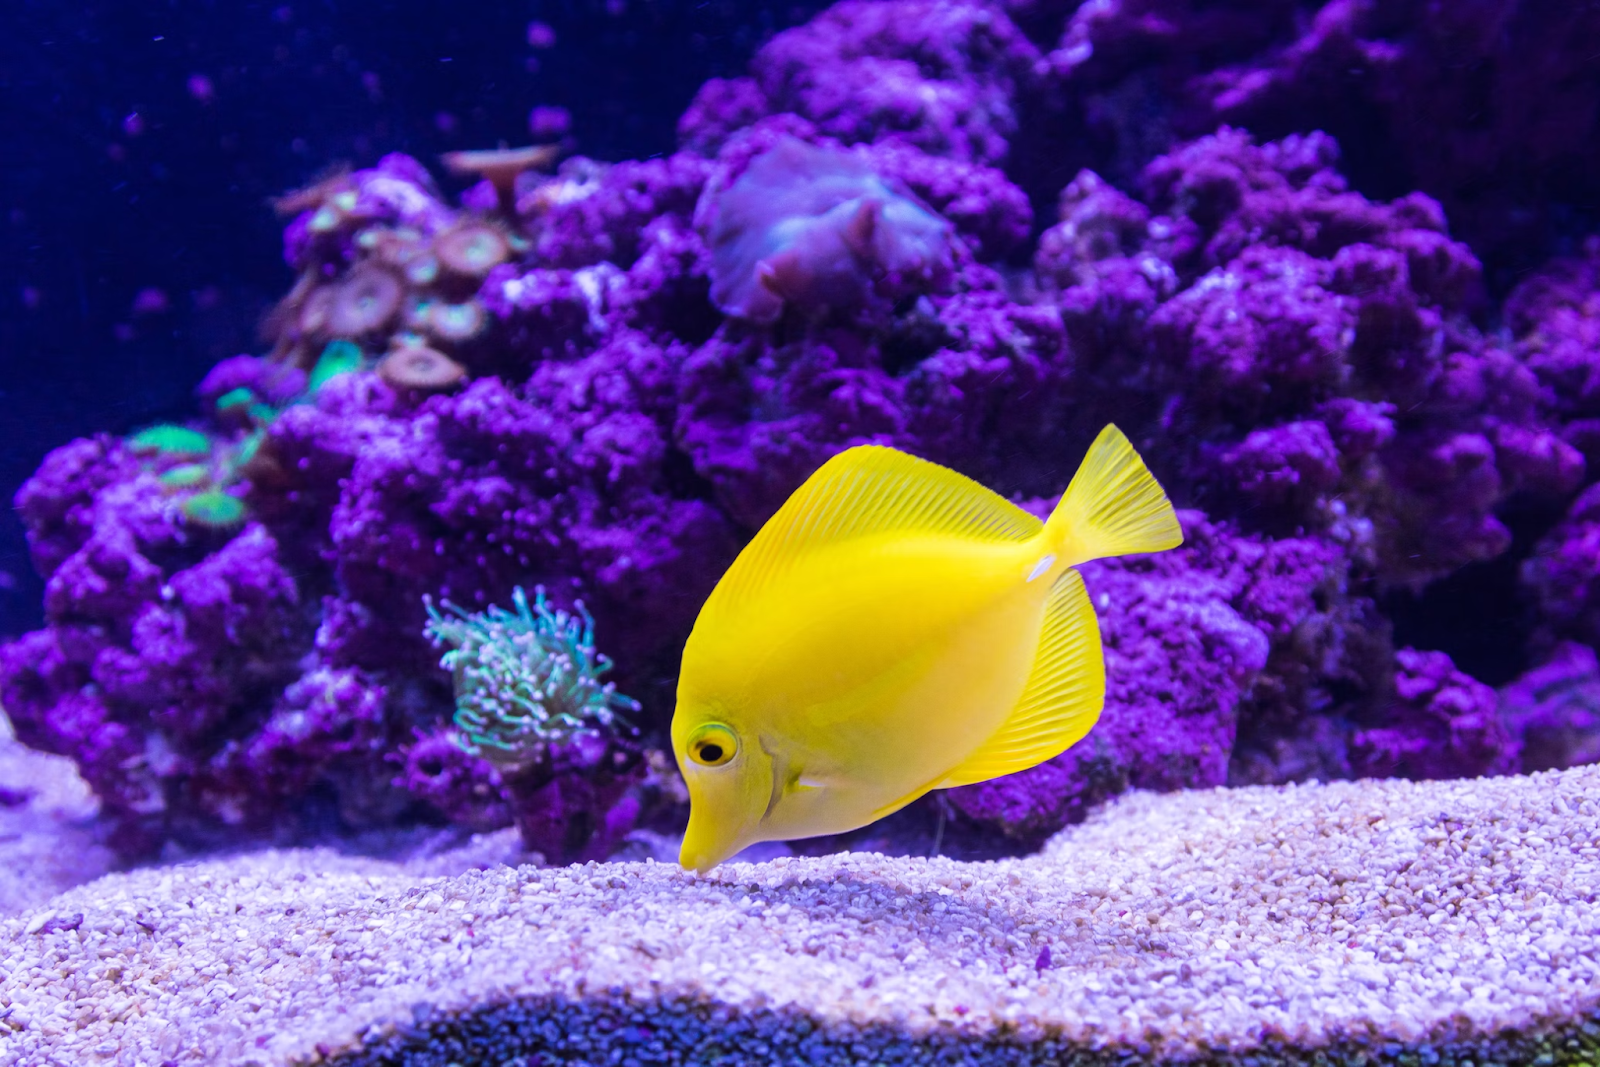 How to Care for Aquarium Fish While on Vacation